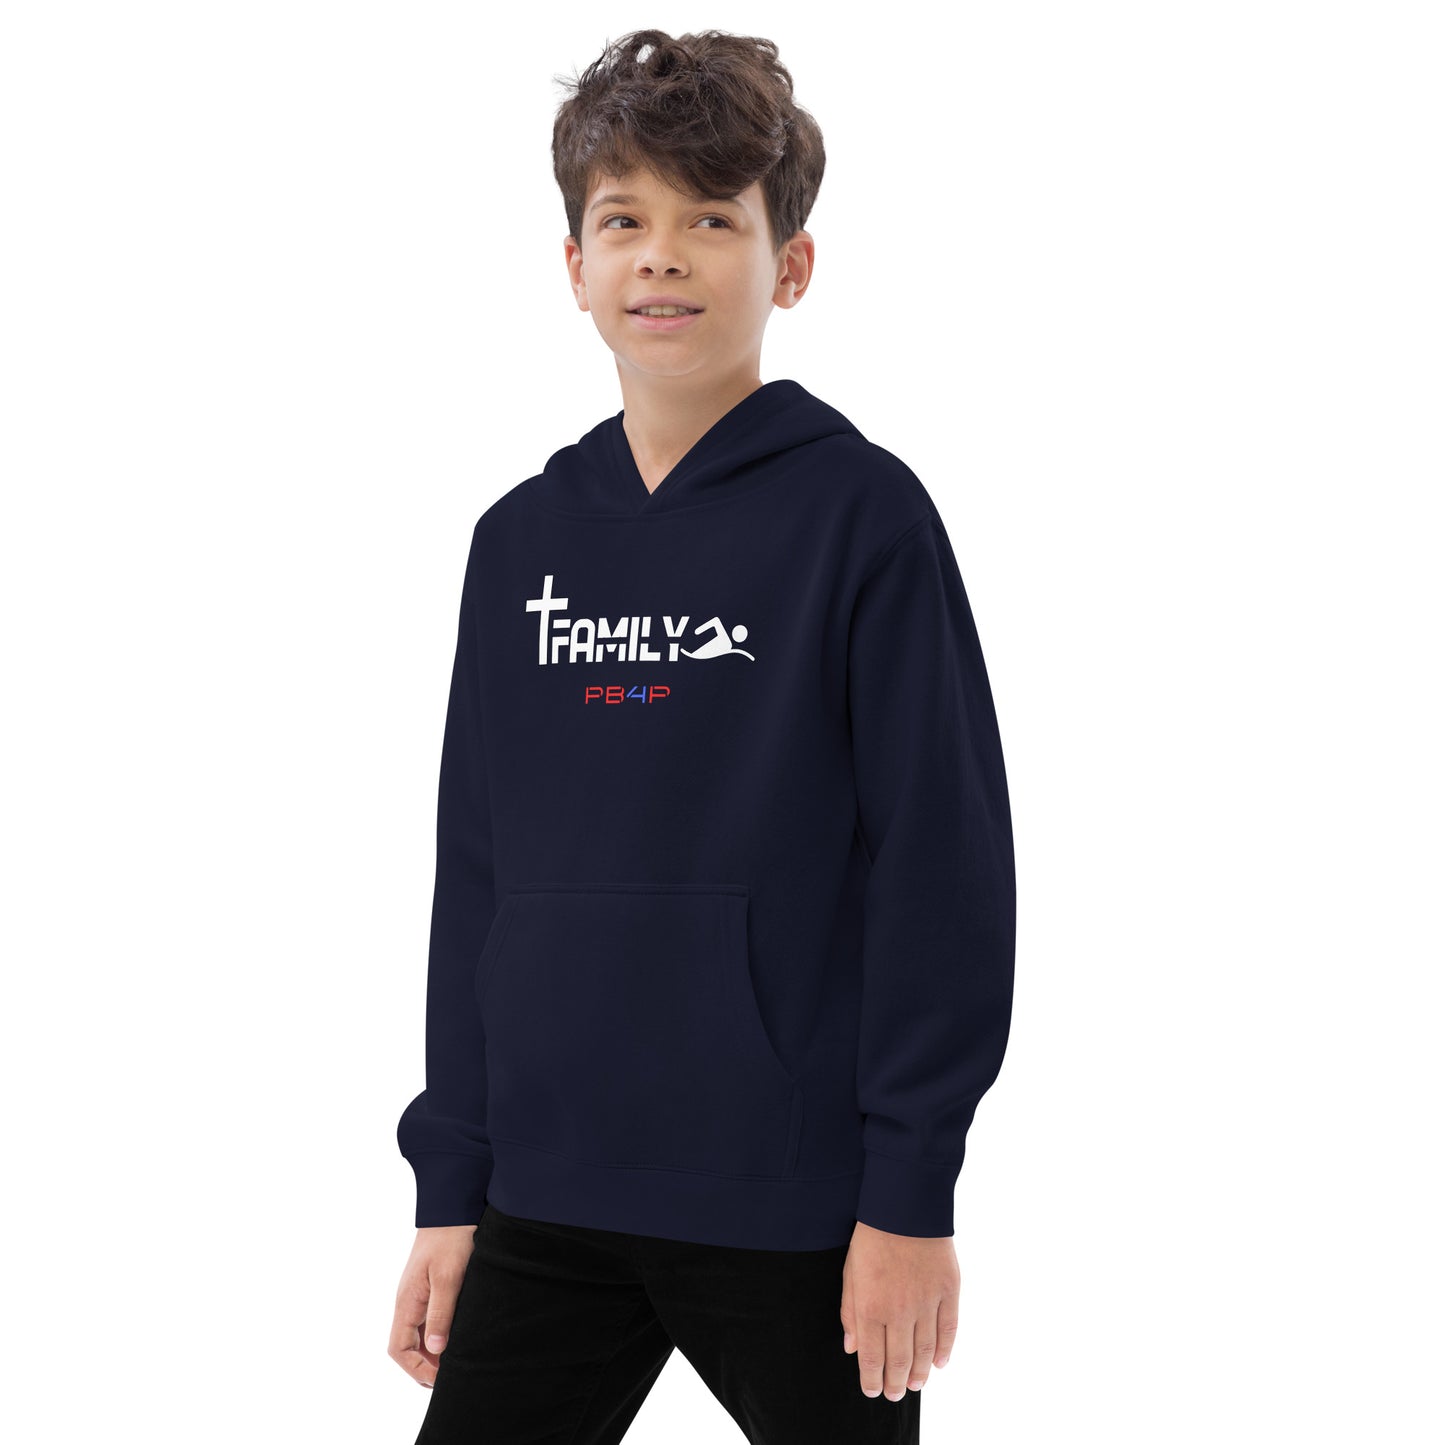 Faith Family Swimming Youth Hoodie